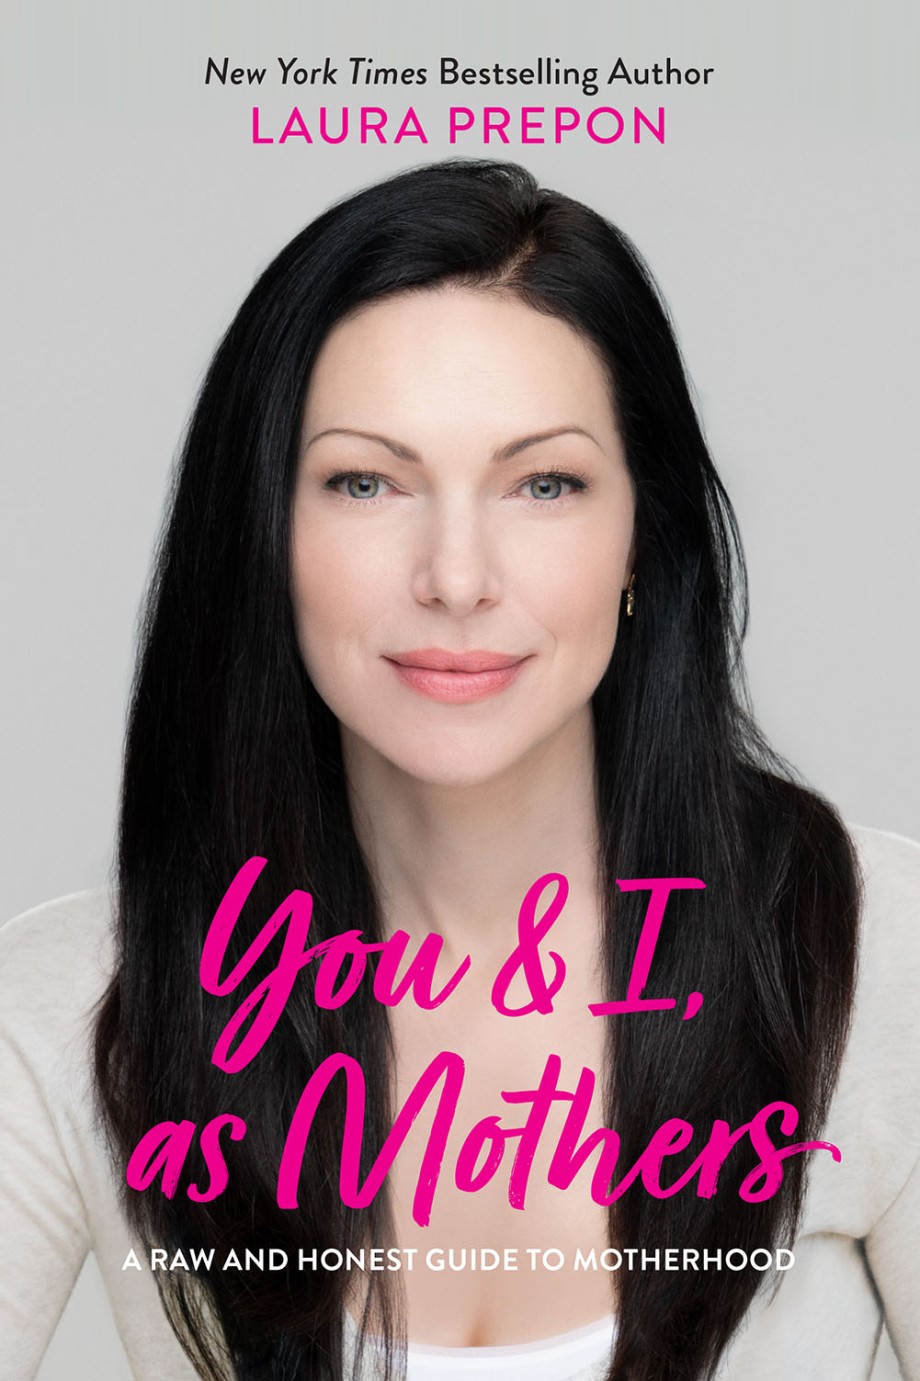 You and I, as Mothers A Raw and Honest Guide to Motherhood